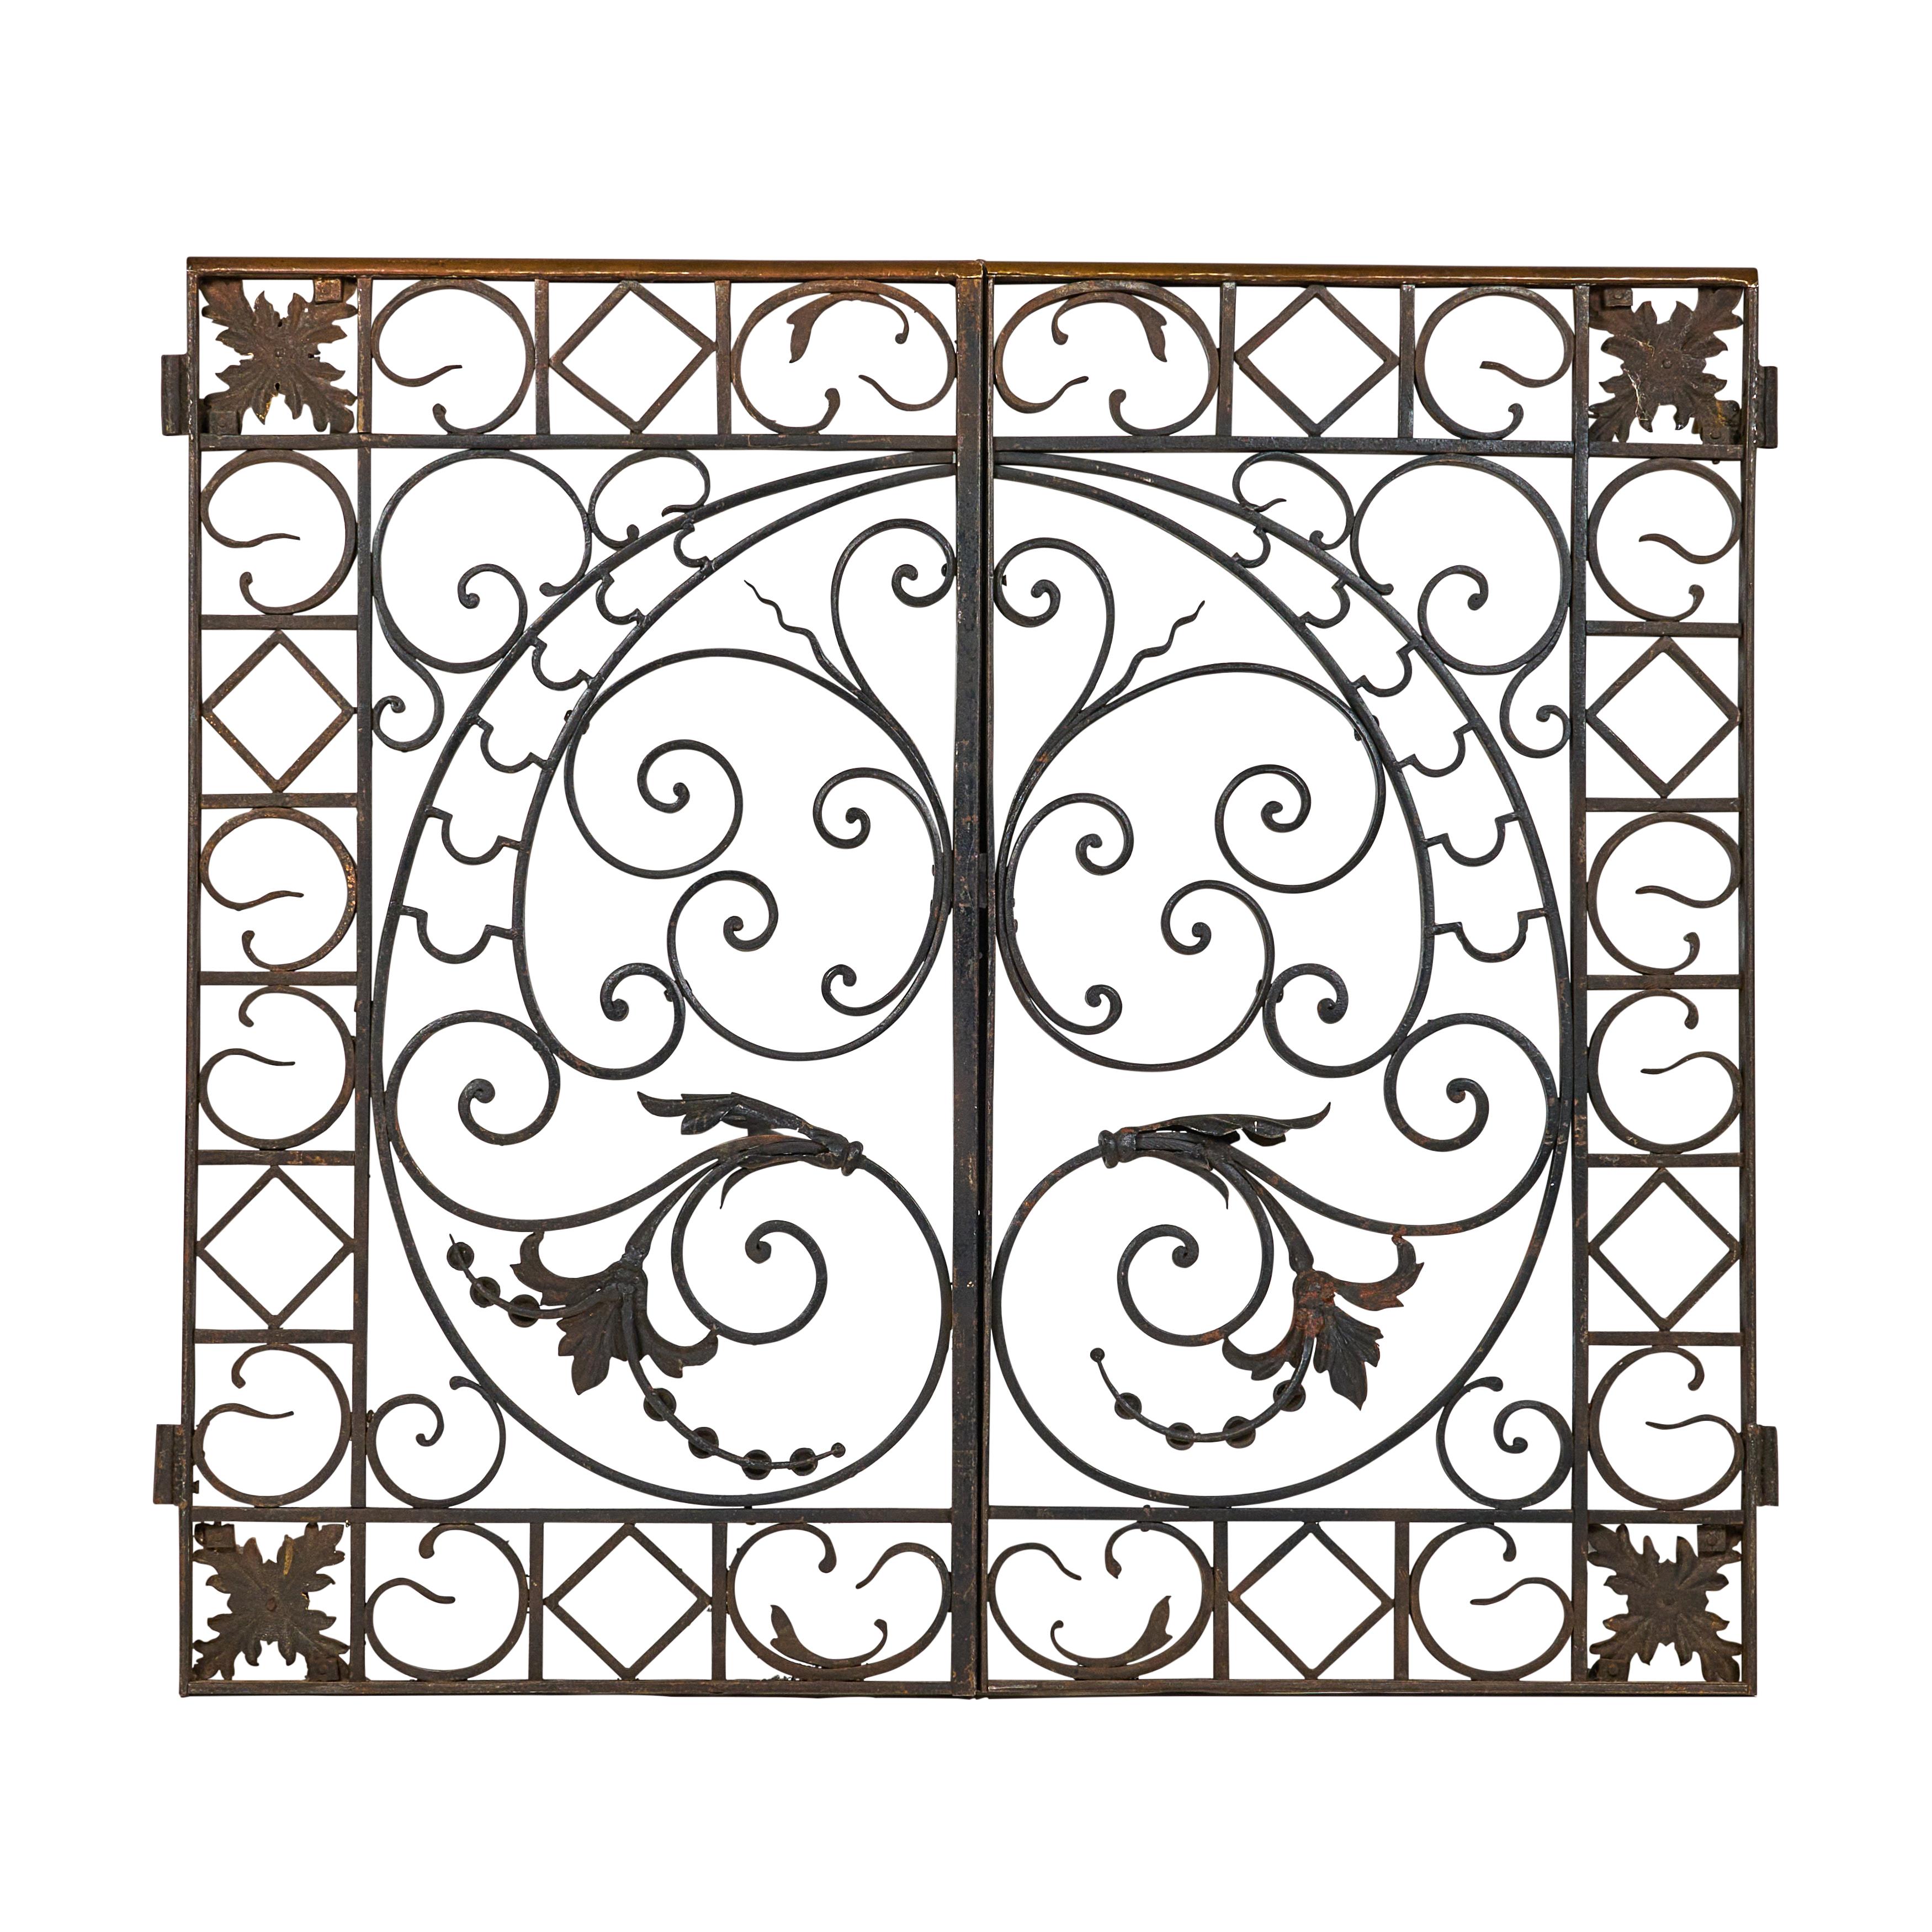 Pair of wrought iron and bronze decorative grills/gates - great quality.